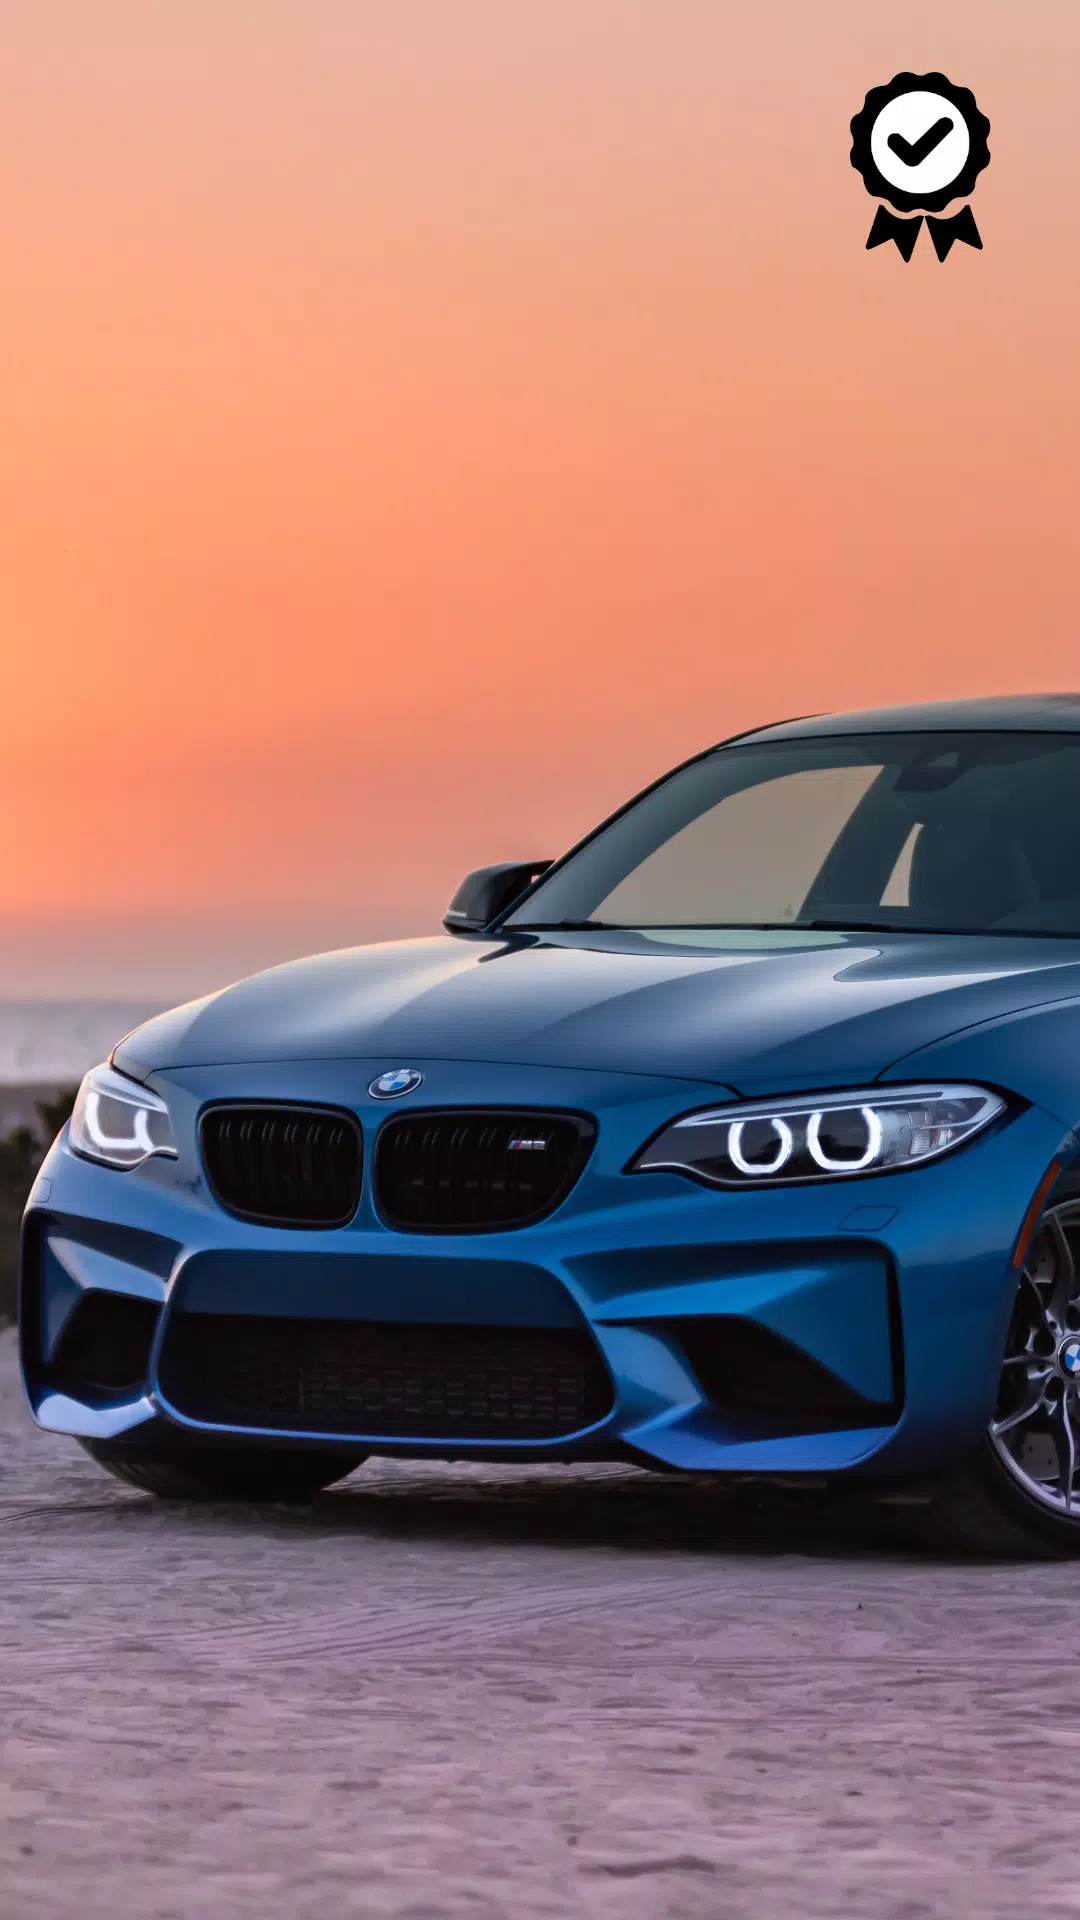 4K Bmw Cars Wallpapers - Free Apk For Android Download